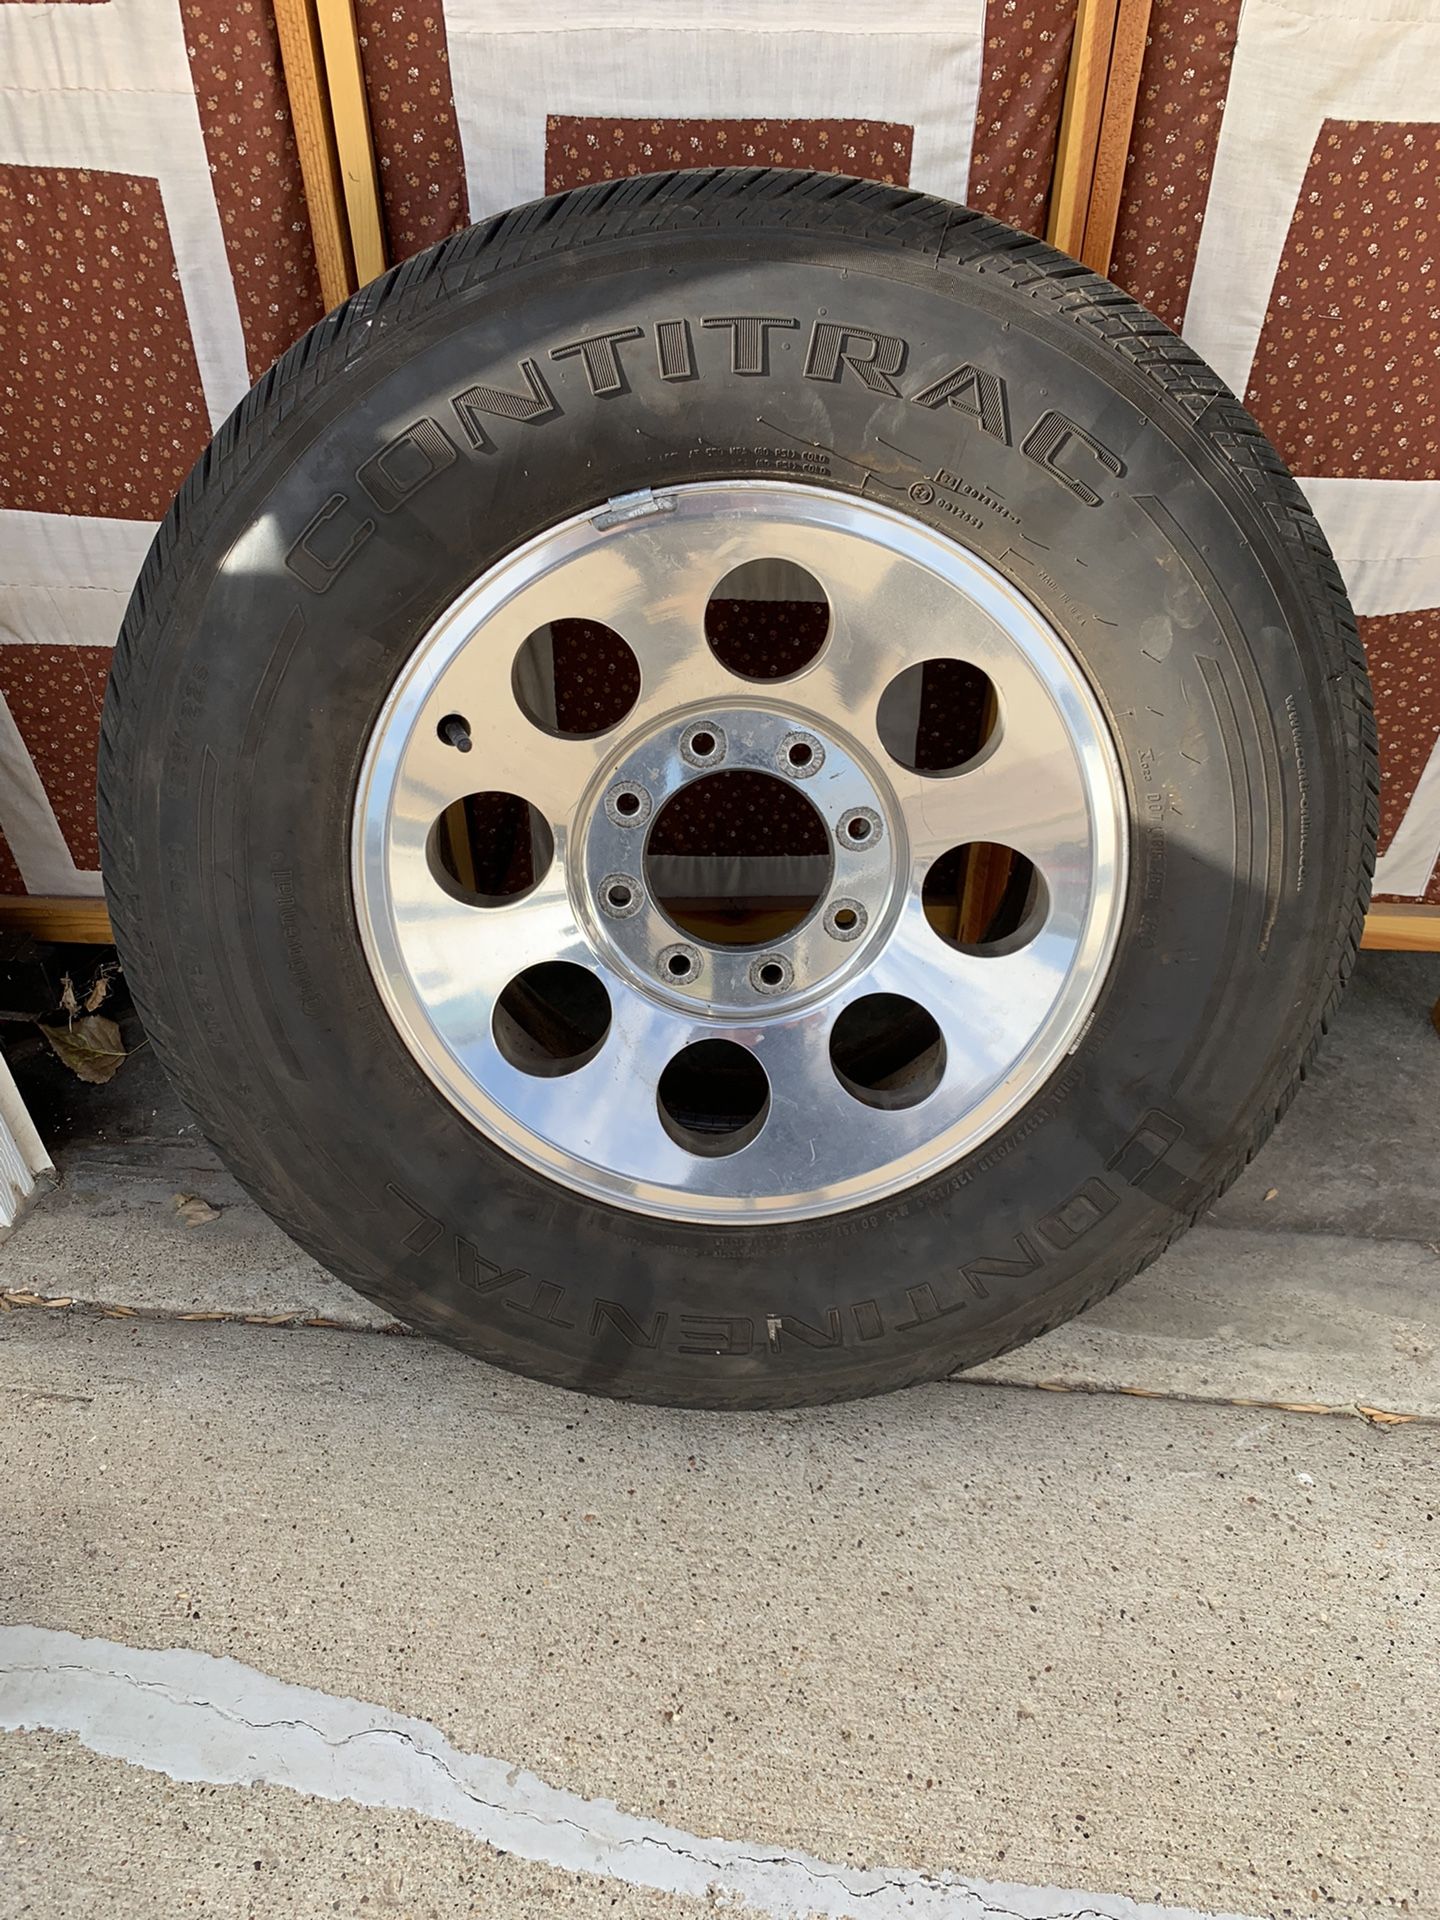 LT 275/70/R18 Tire And Ford Rim(3/4 & 1 Ton)